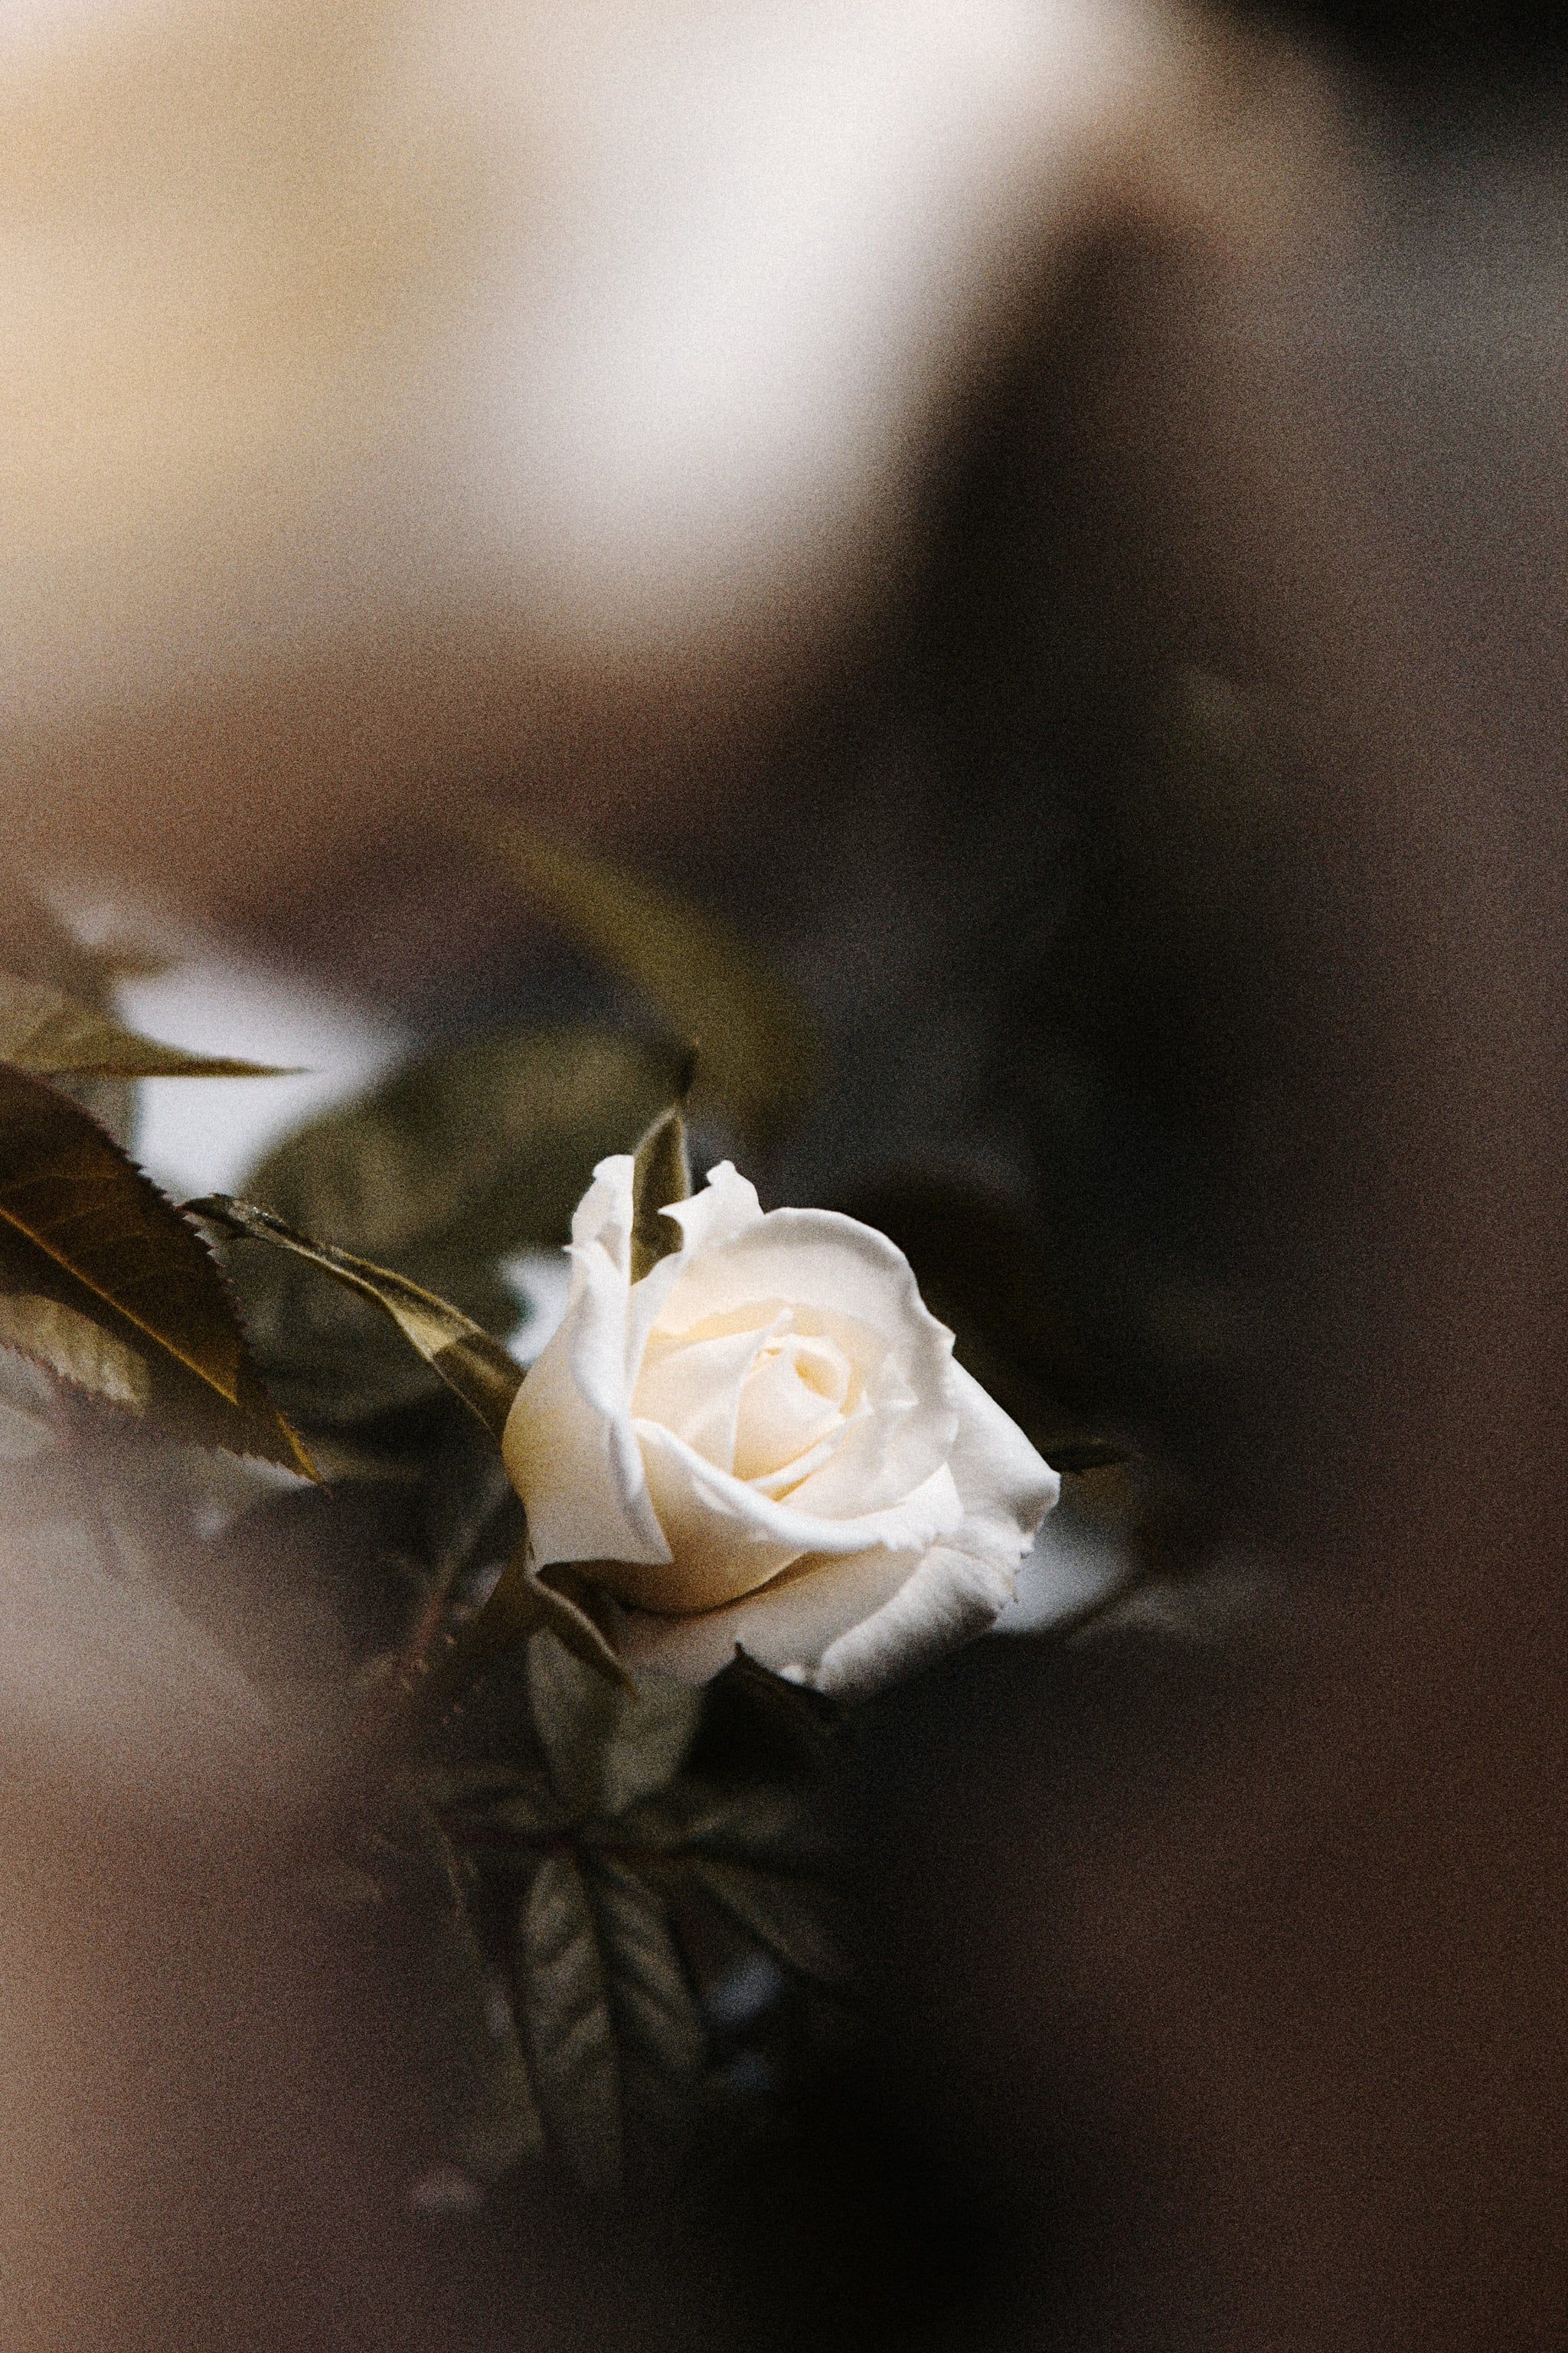 Valentine's Day Wallpaper: White Rose. The Dreamiest iPhone Wallpaper For Valentine's Day That Fit Any Aesthetic